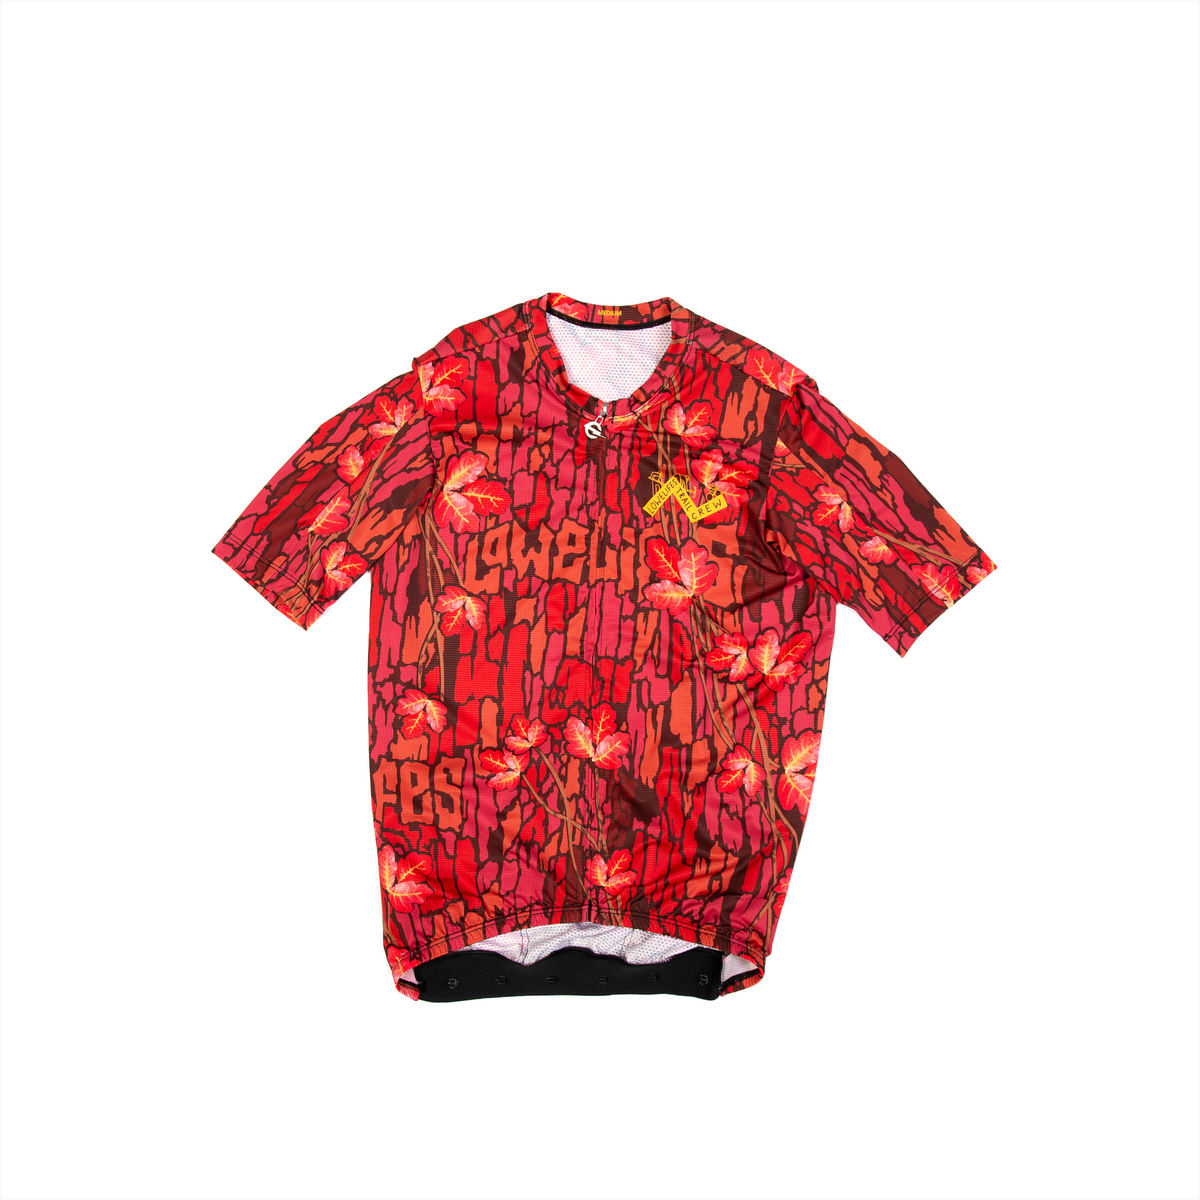 LOWELIFES - LADERA JERSEY - RED